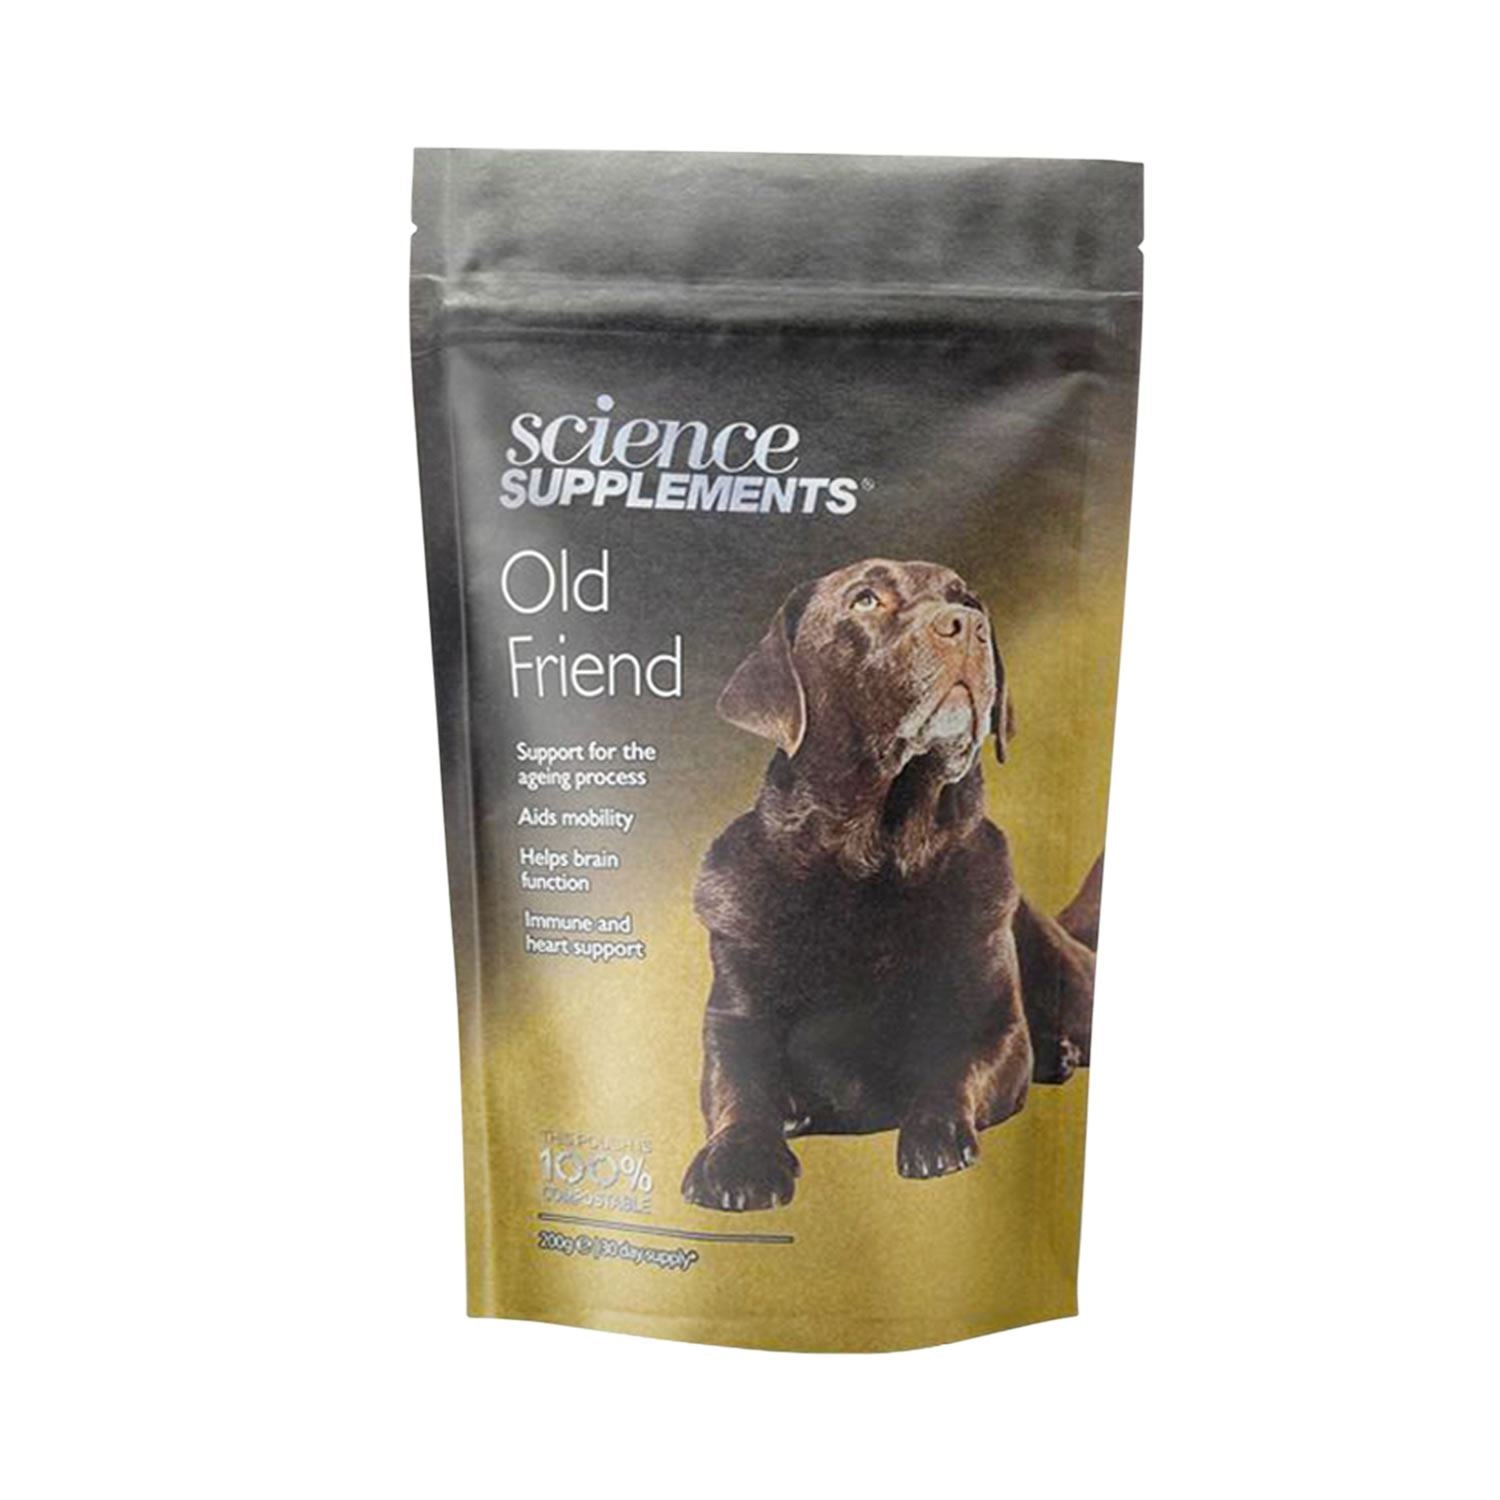 Science Supplements Old Friend K9 - Just Horse Riders